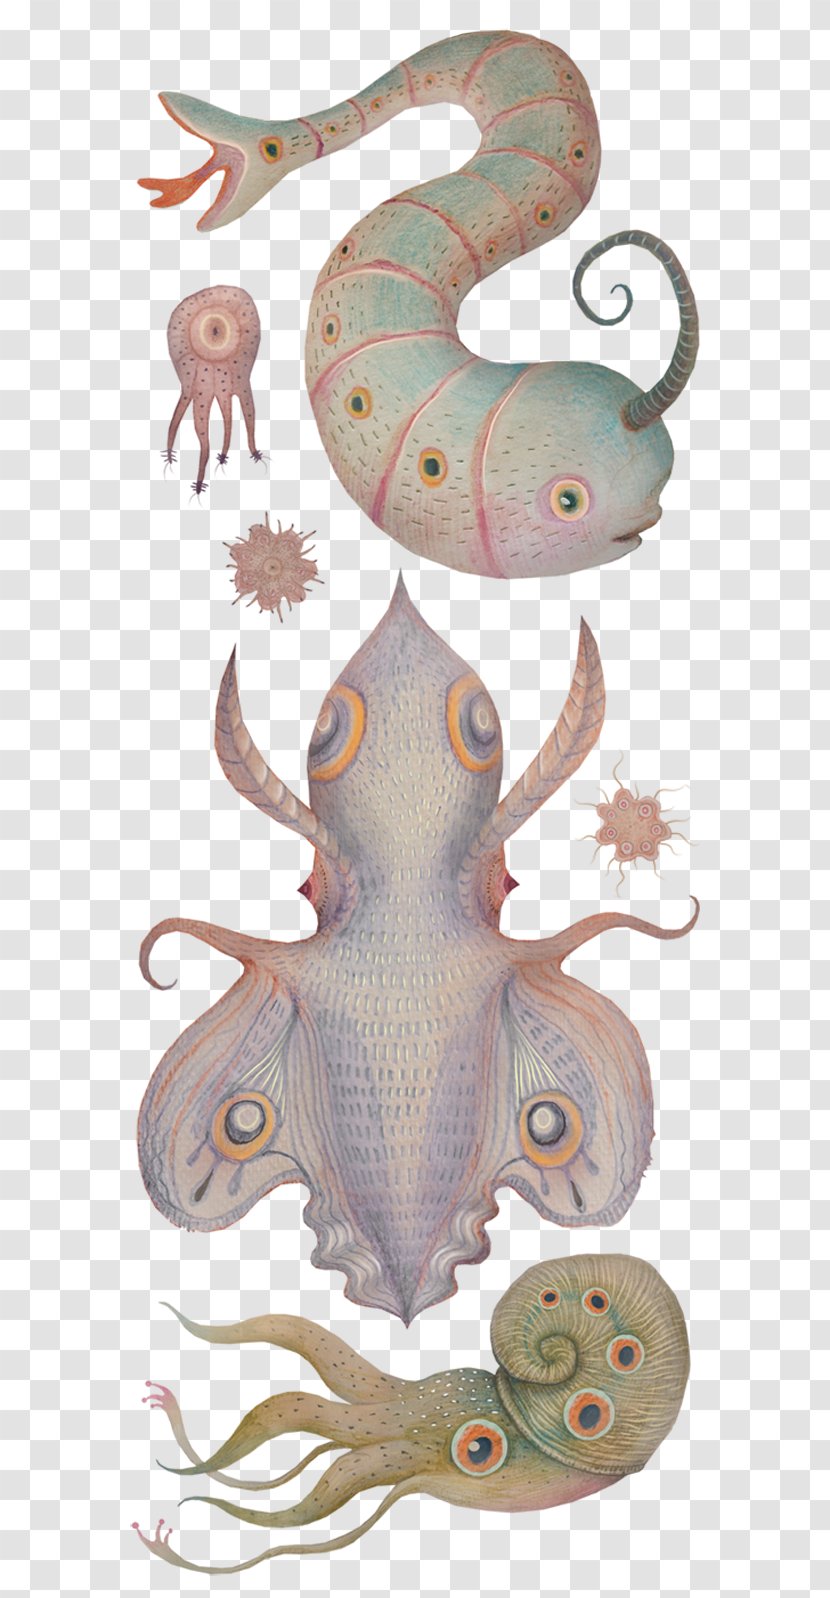 Octopus Squid Cephalopod Narwhal - Nature Sea Animals Marine Microorganisms Transparent PNG